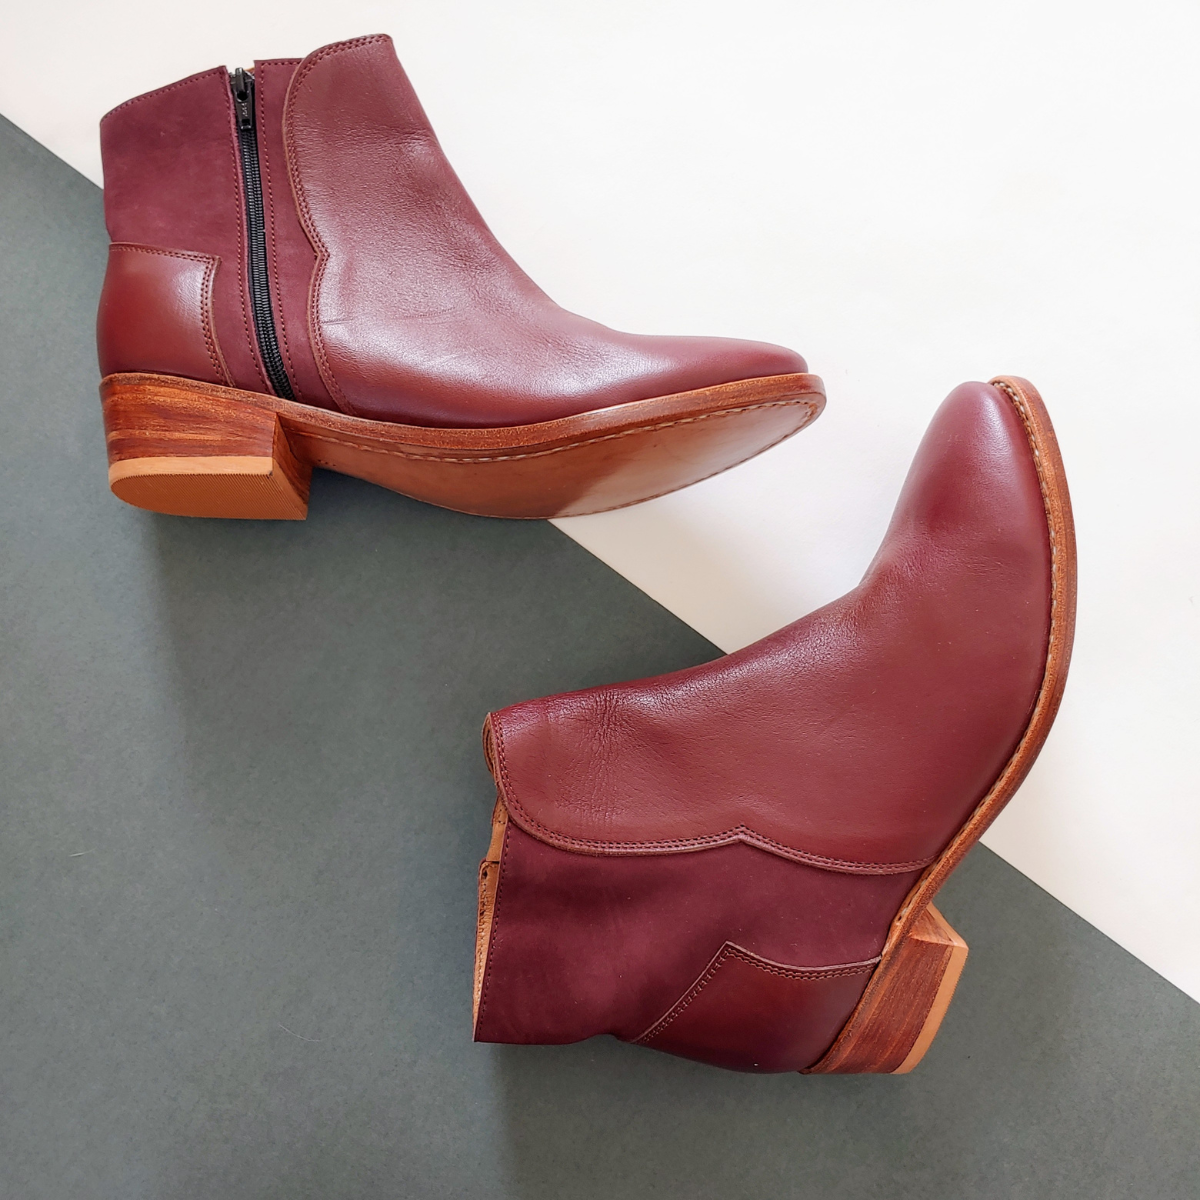 Brette Boot in Merlot Leather size 11 - New (FINAL SALE PREORDER)